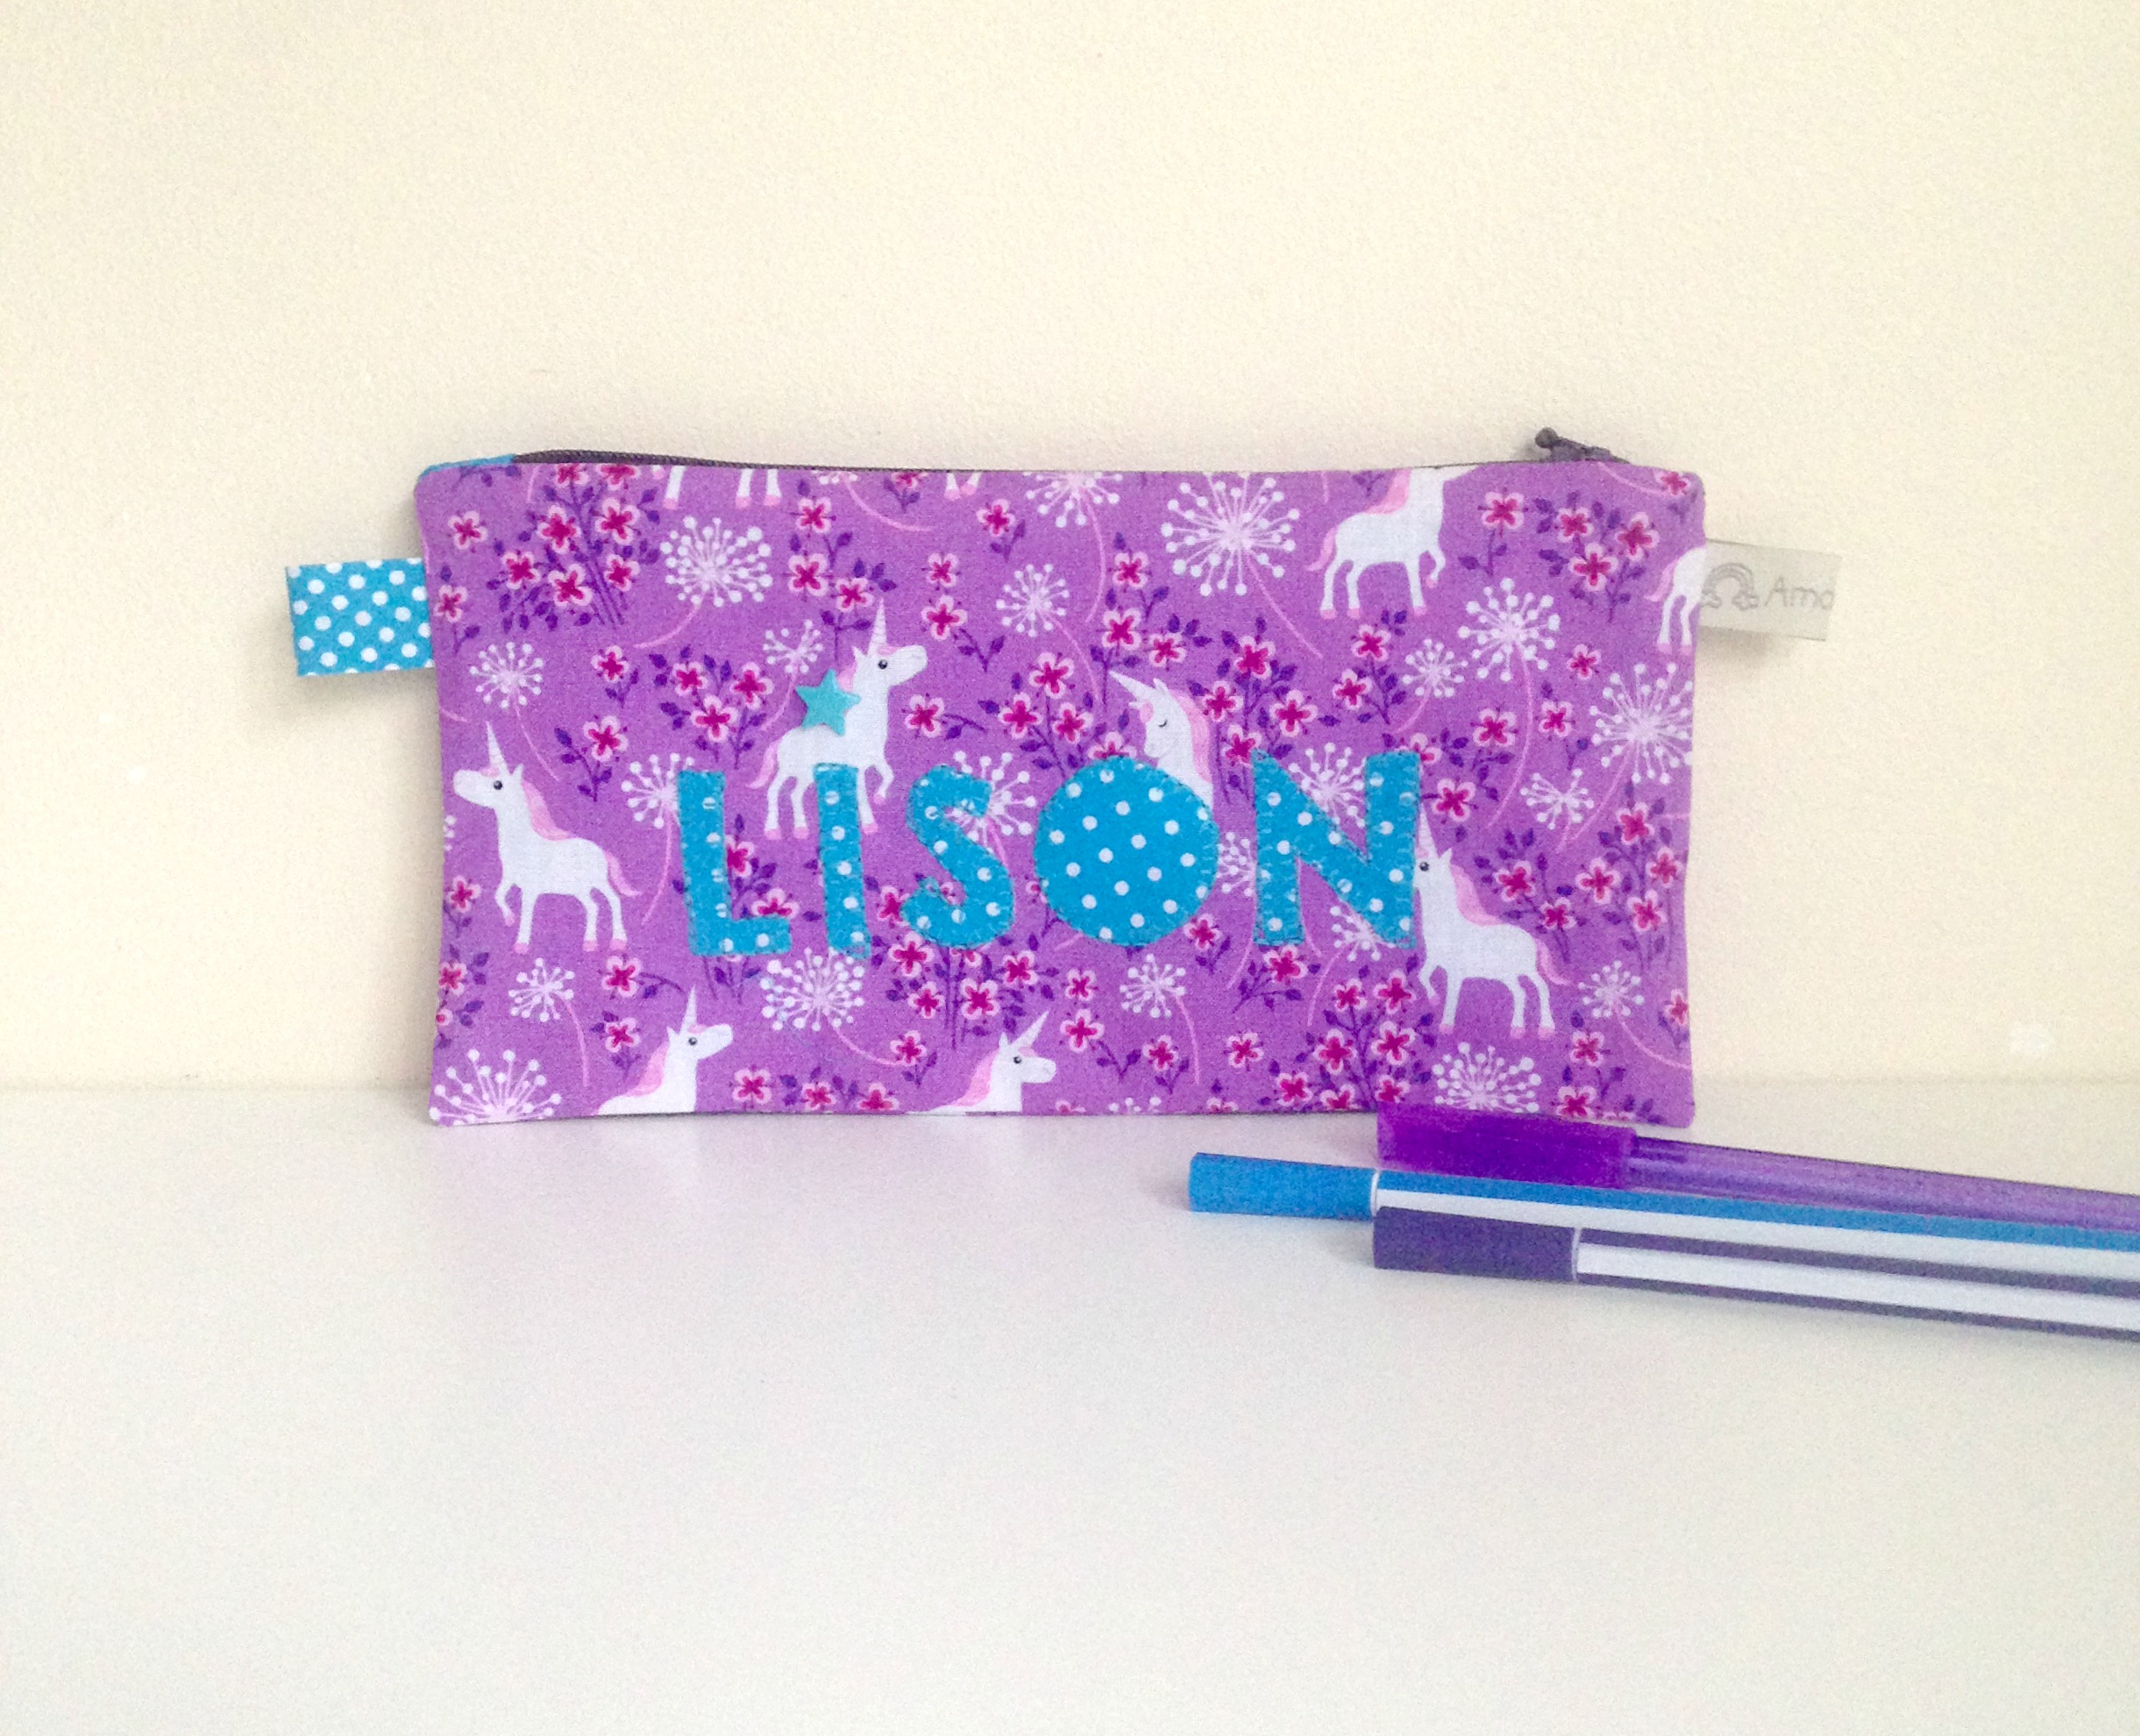 Trousse rose clair ecole crayon maquillage fee lune personnalisee